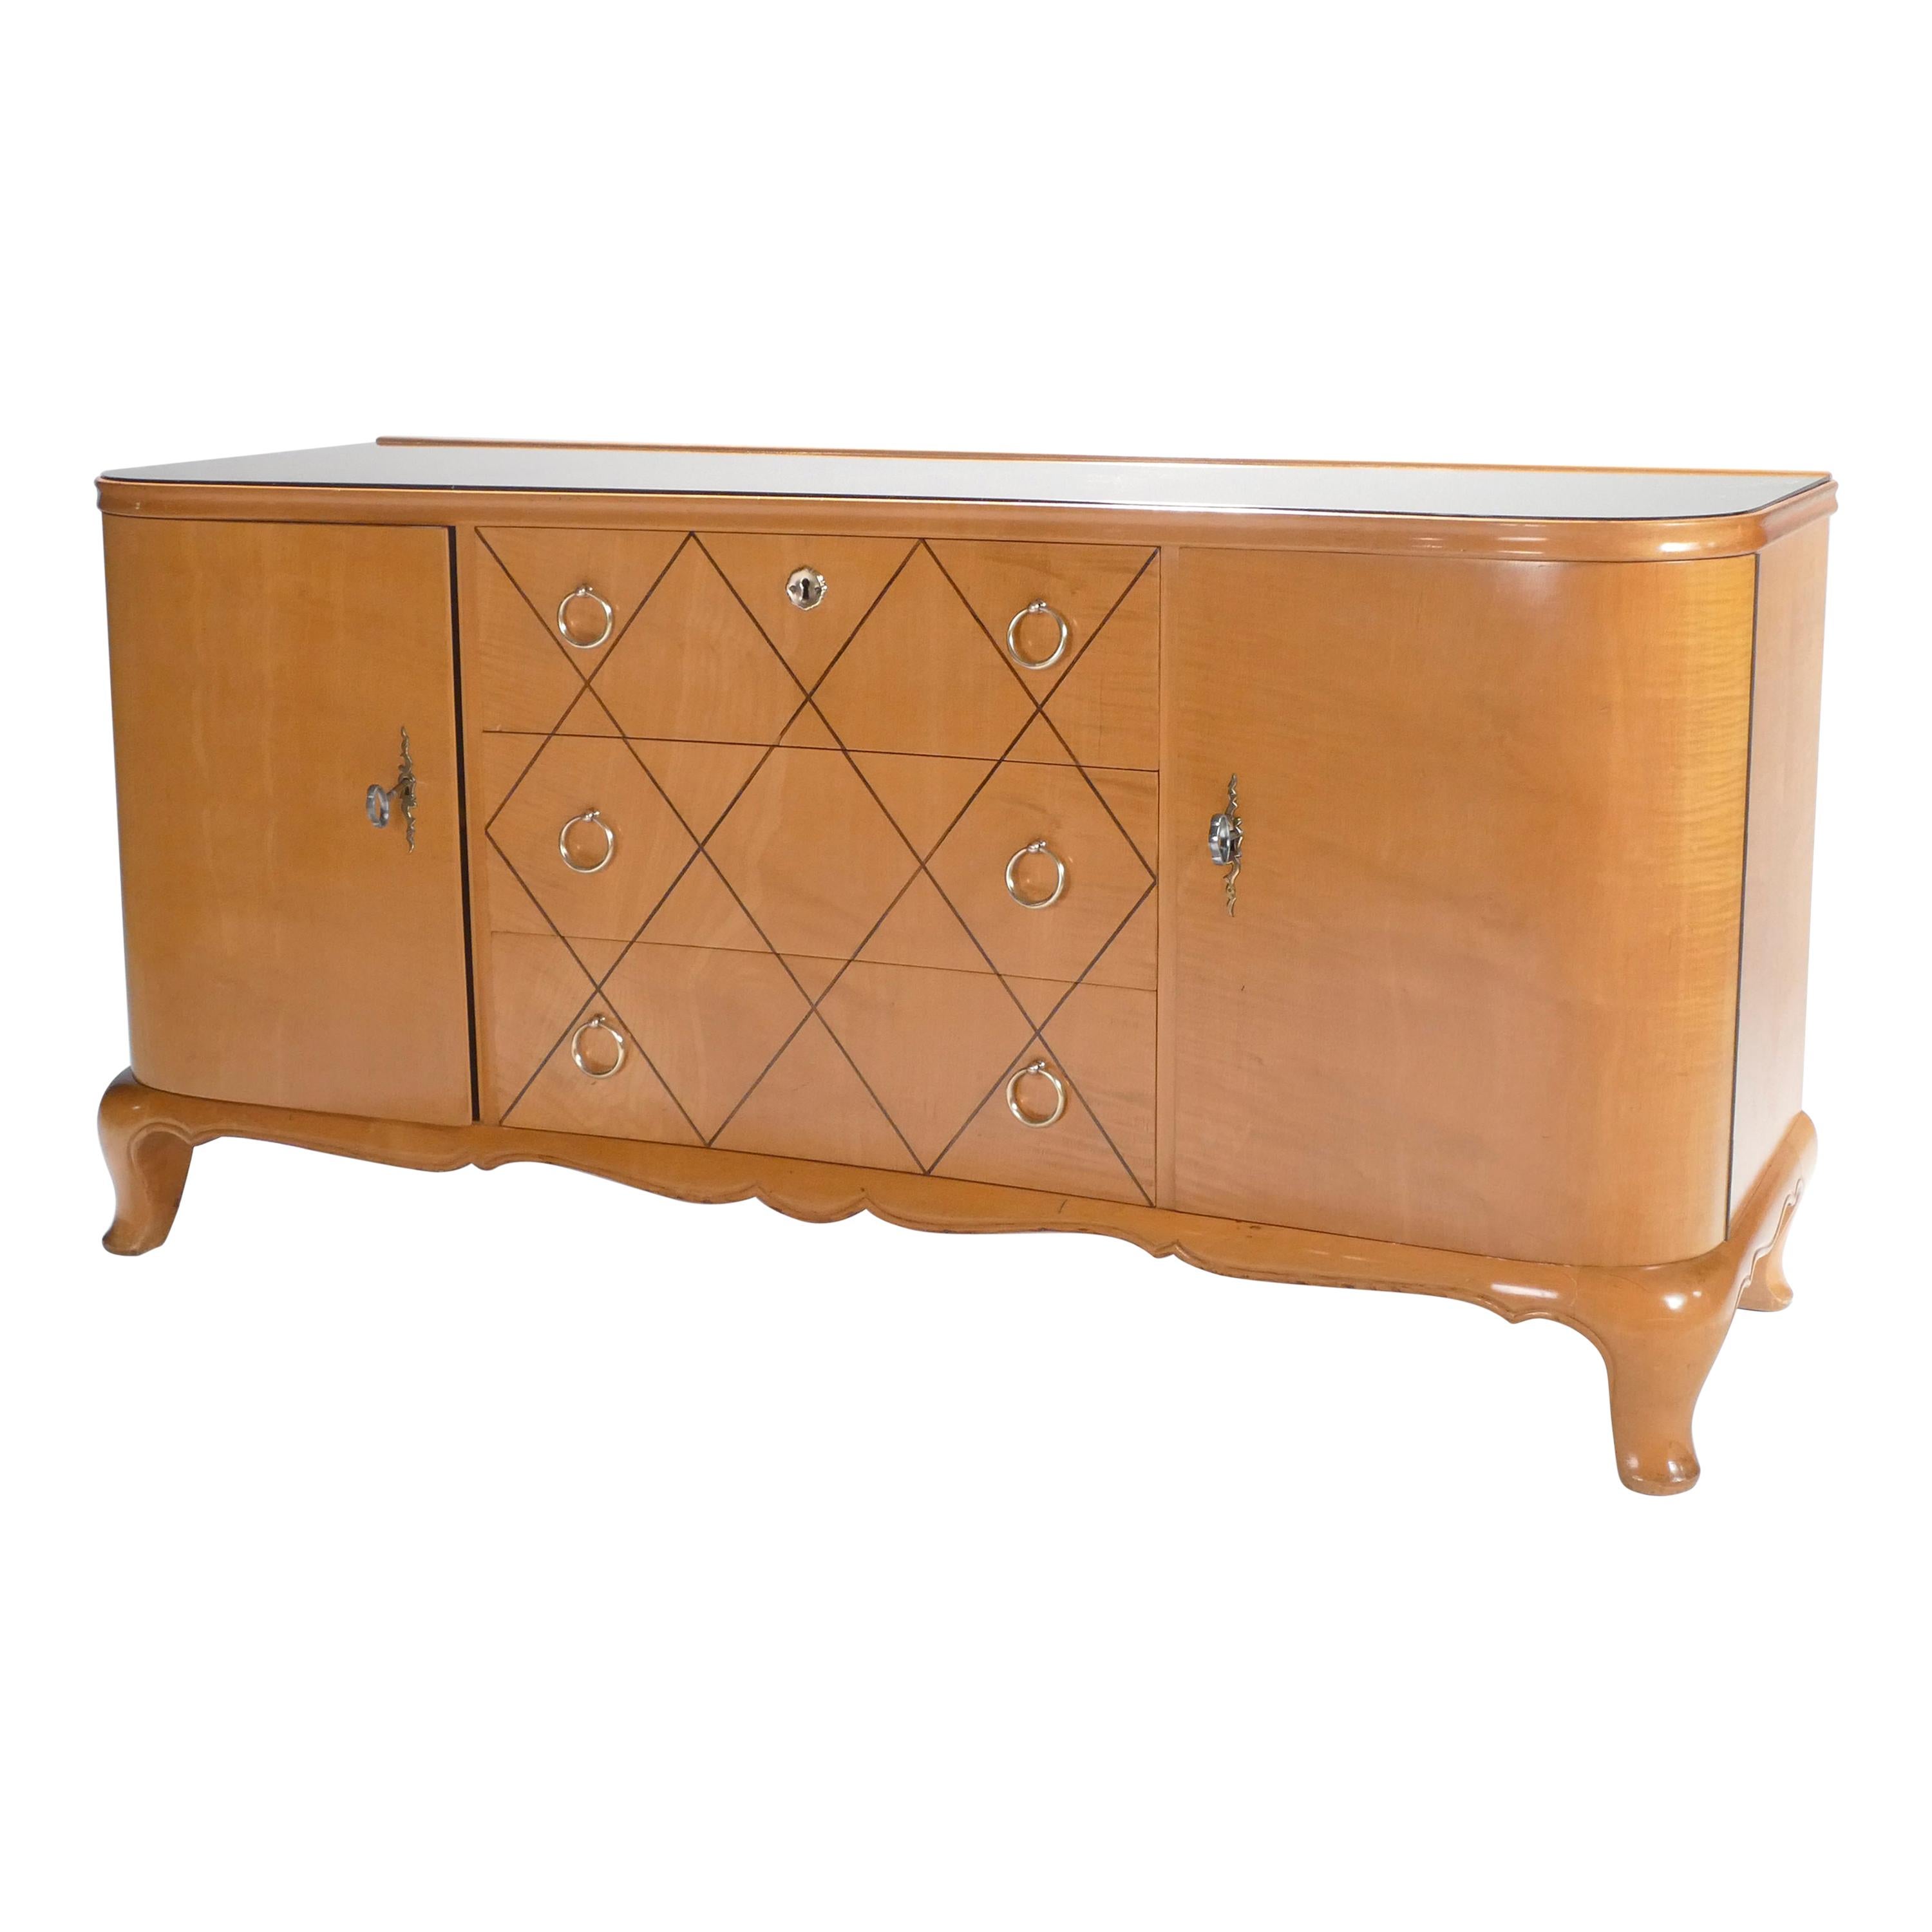 French René Prou Sycamore Mirrored Brass Sideboard Commode, 1950s